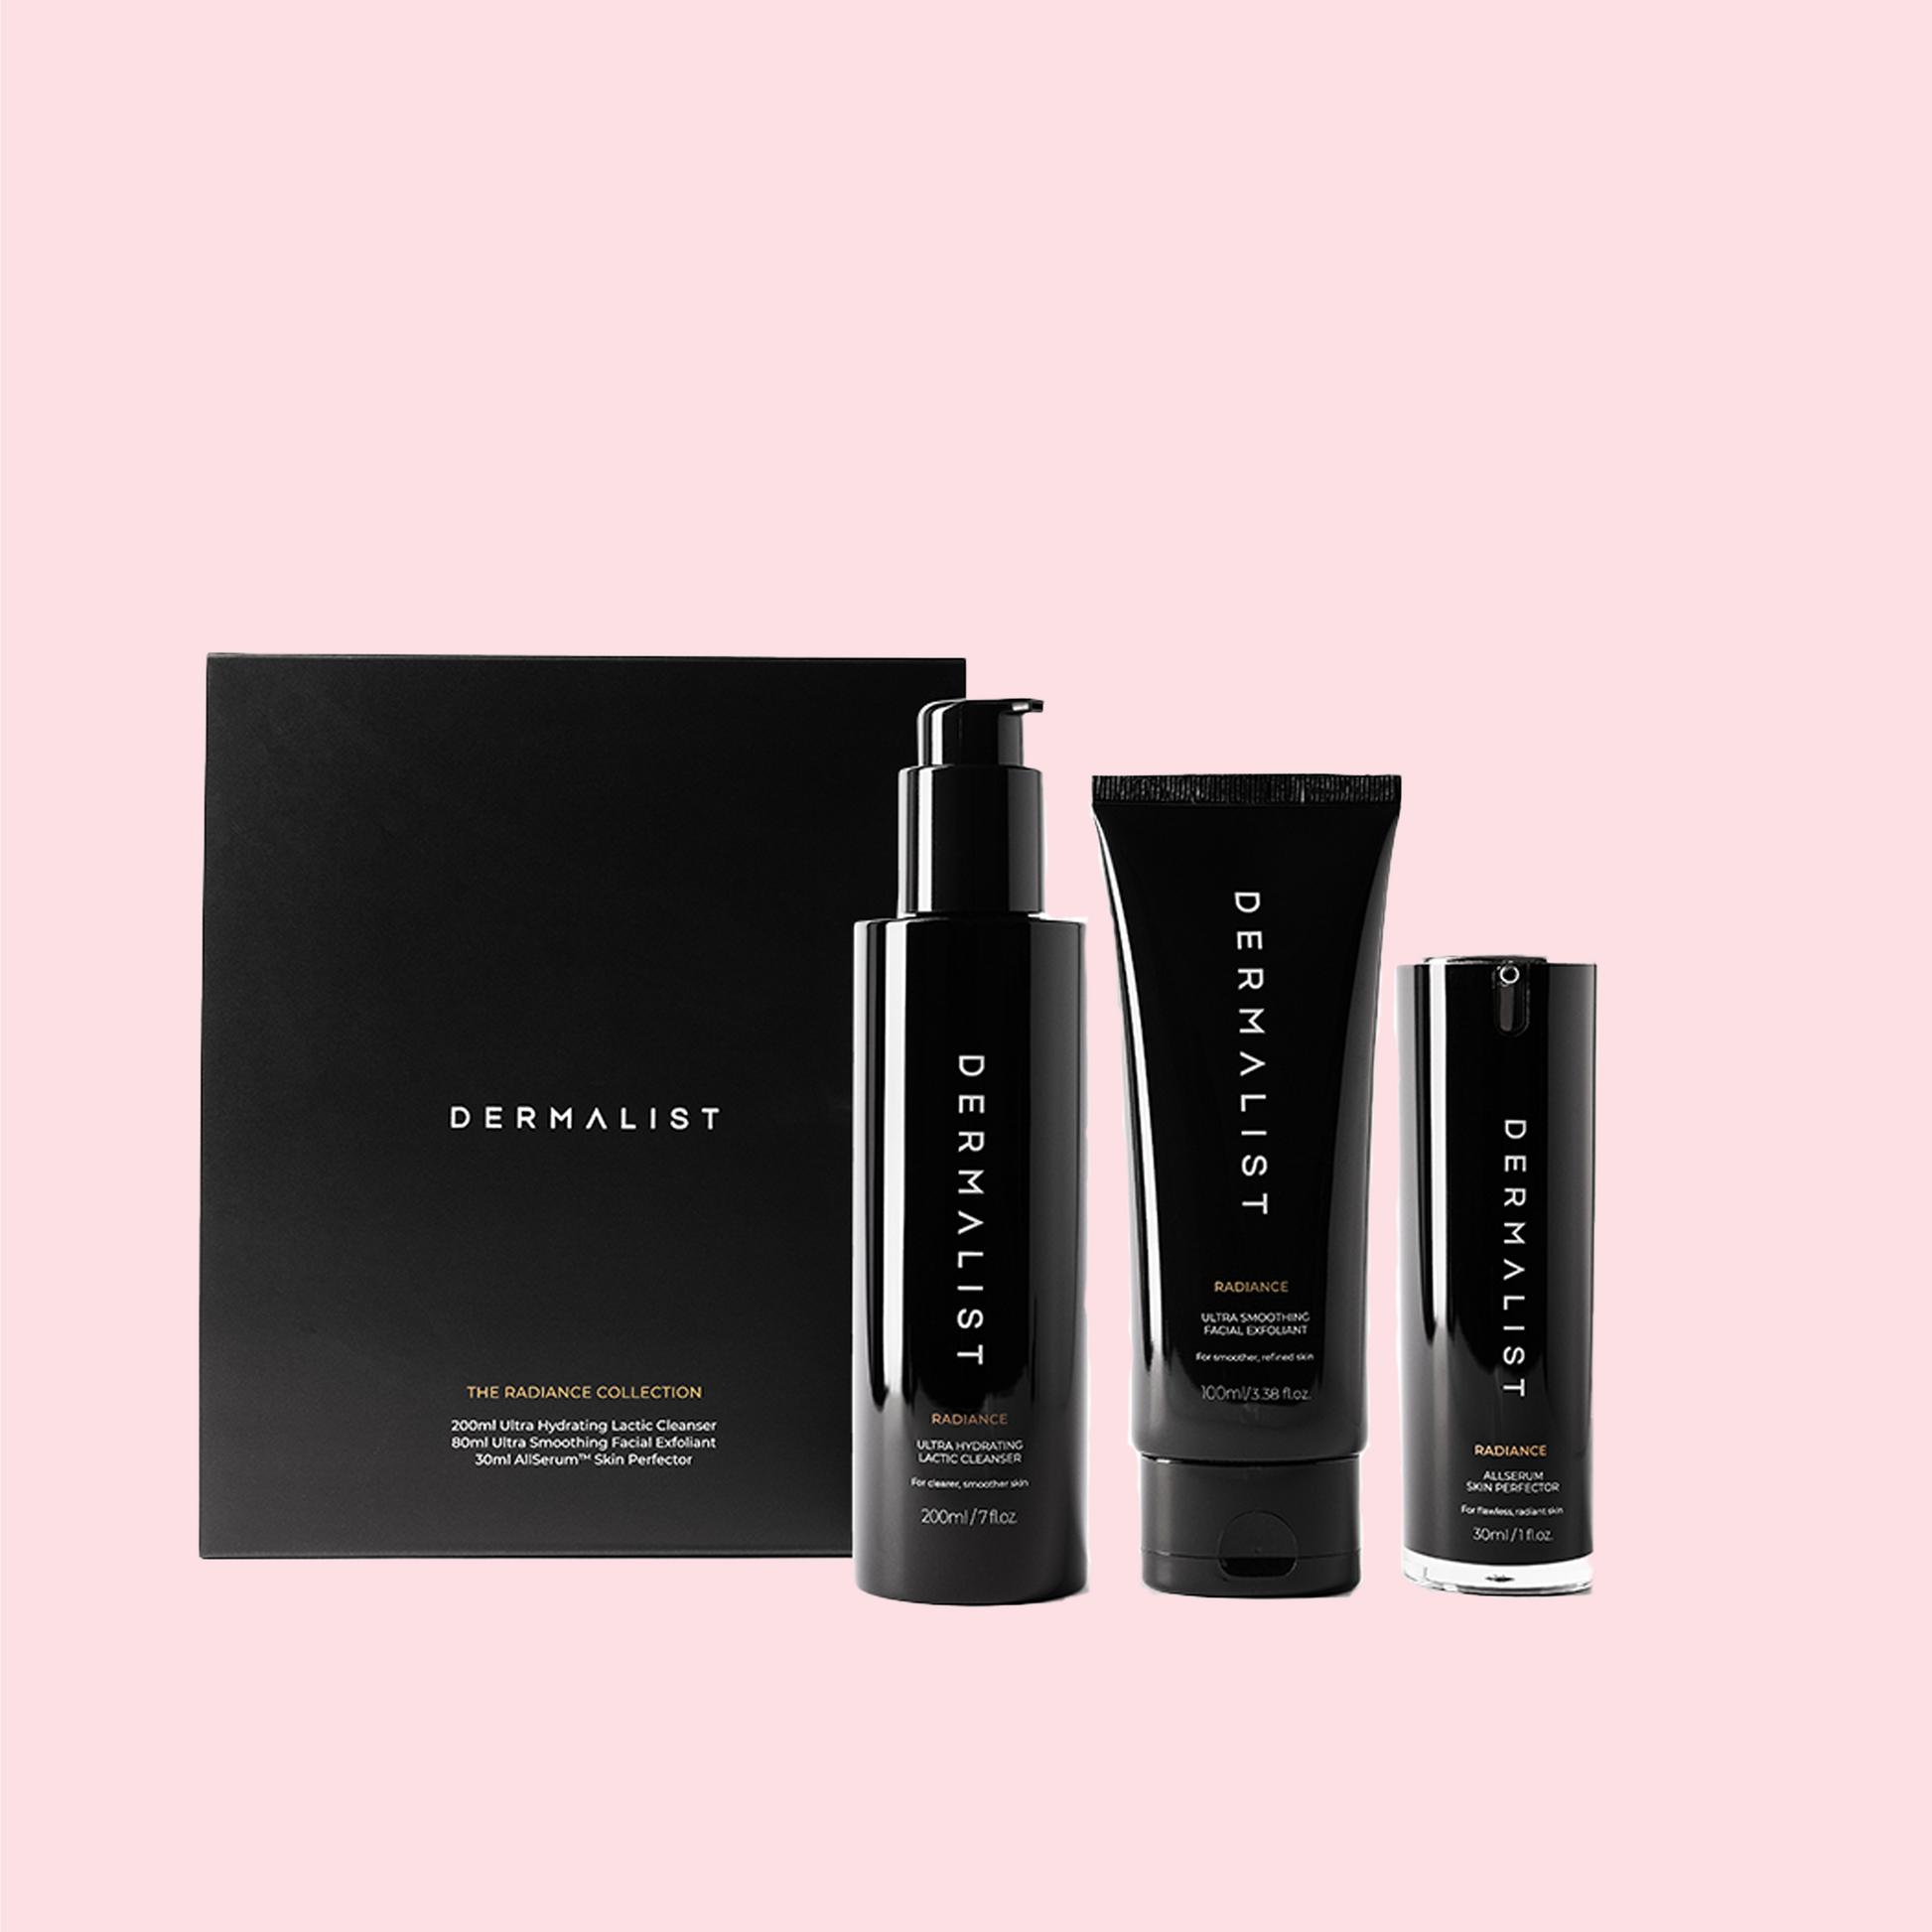 The Radiance Collection - Your Complete Skin Solution